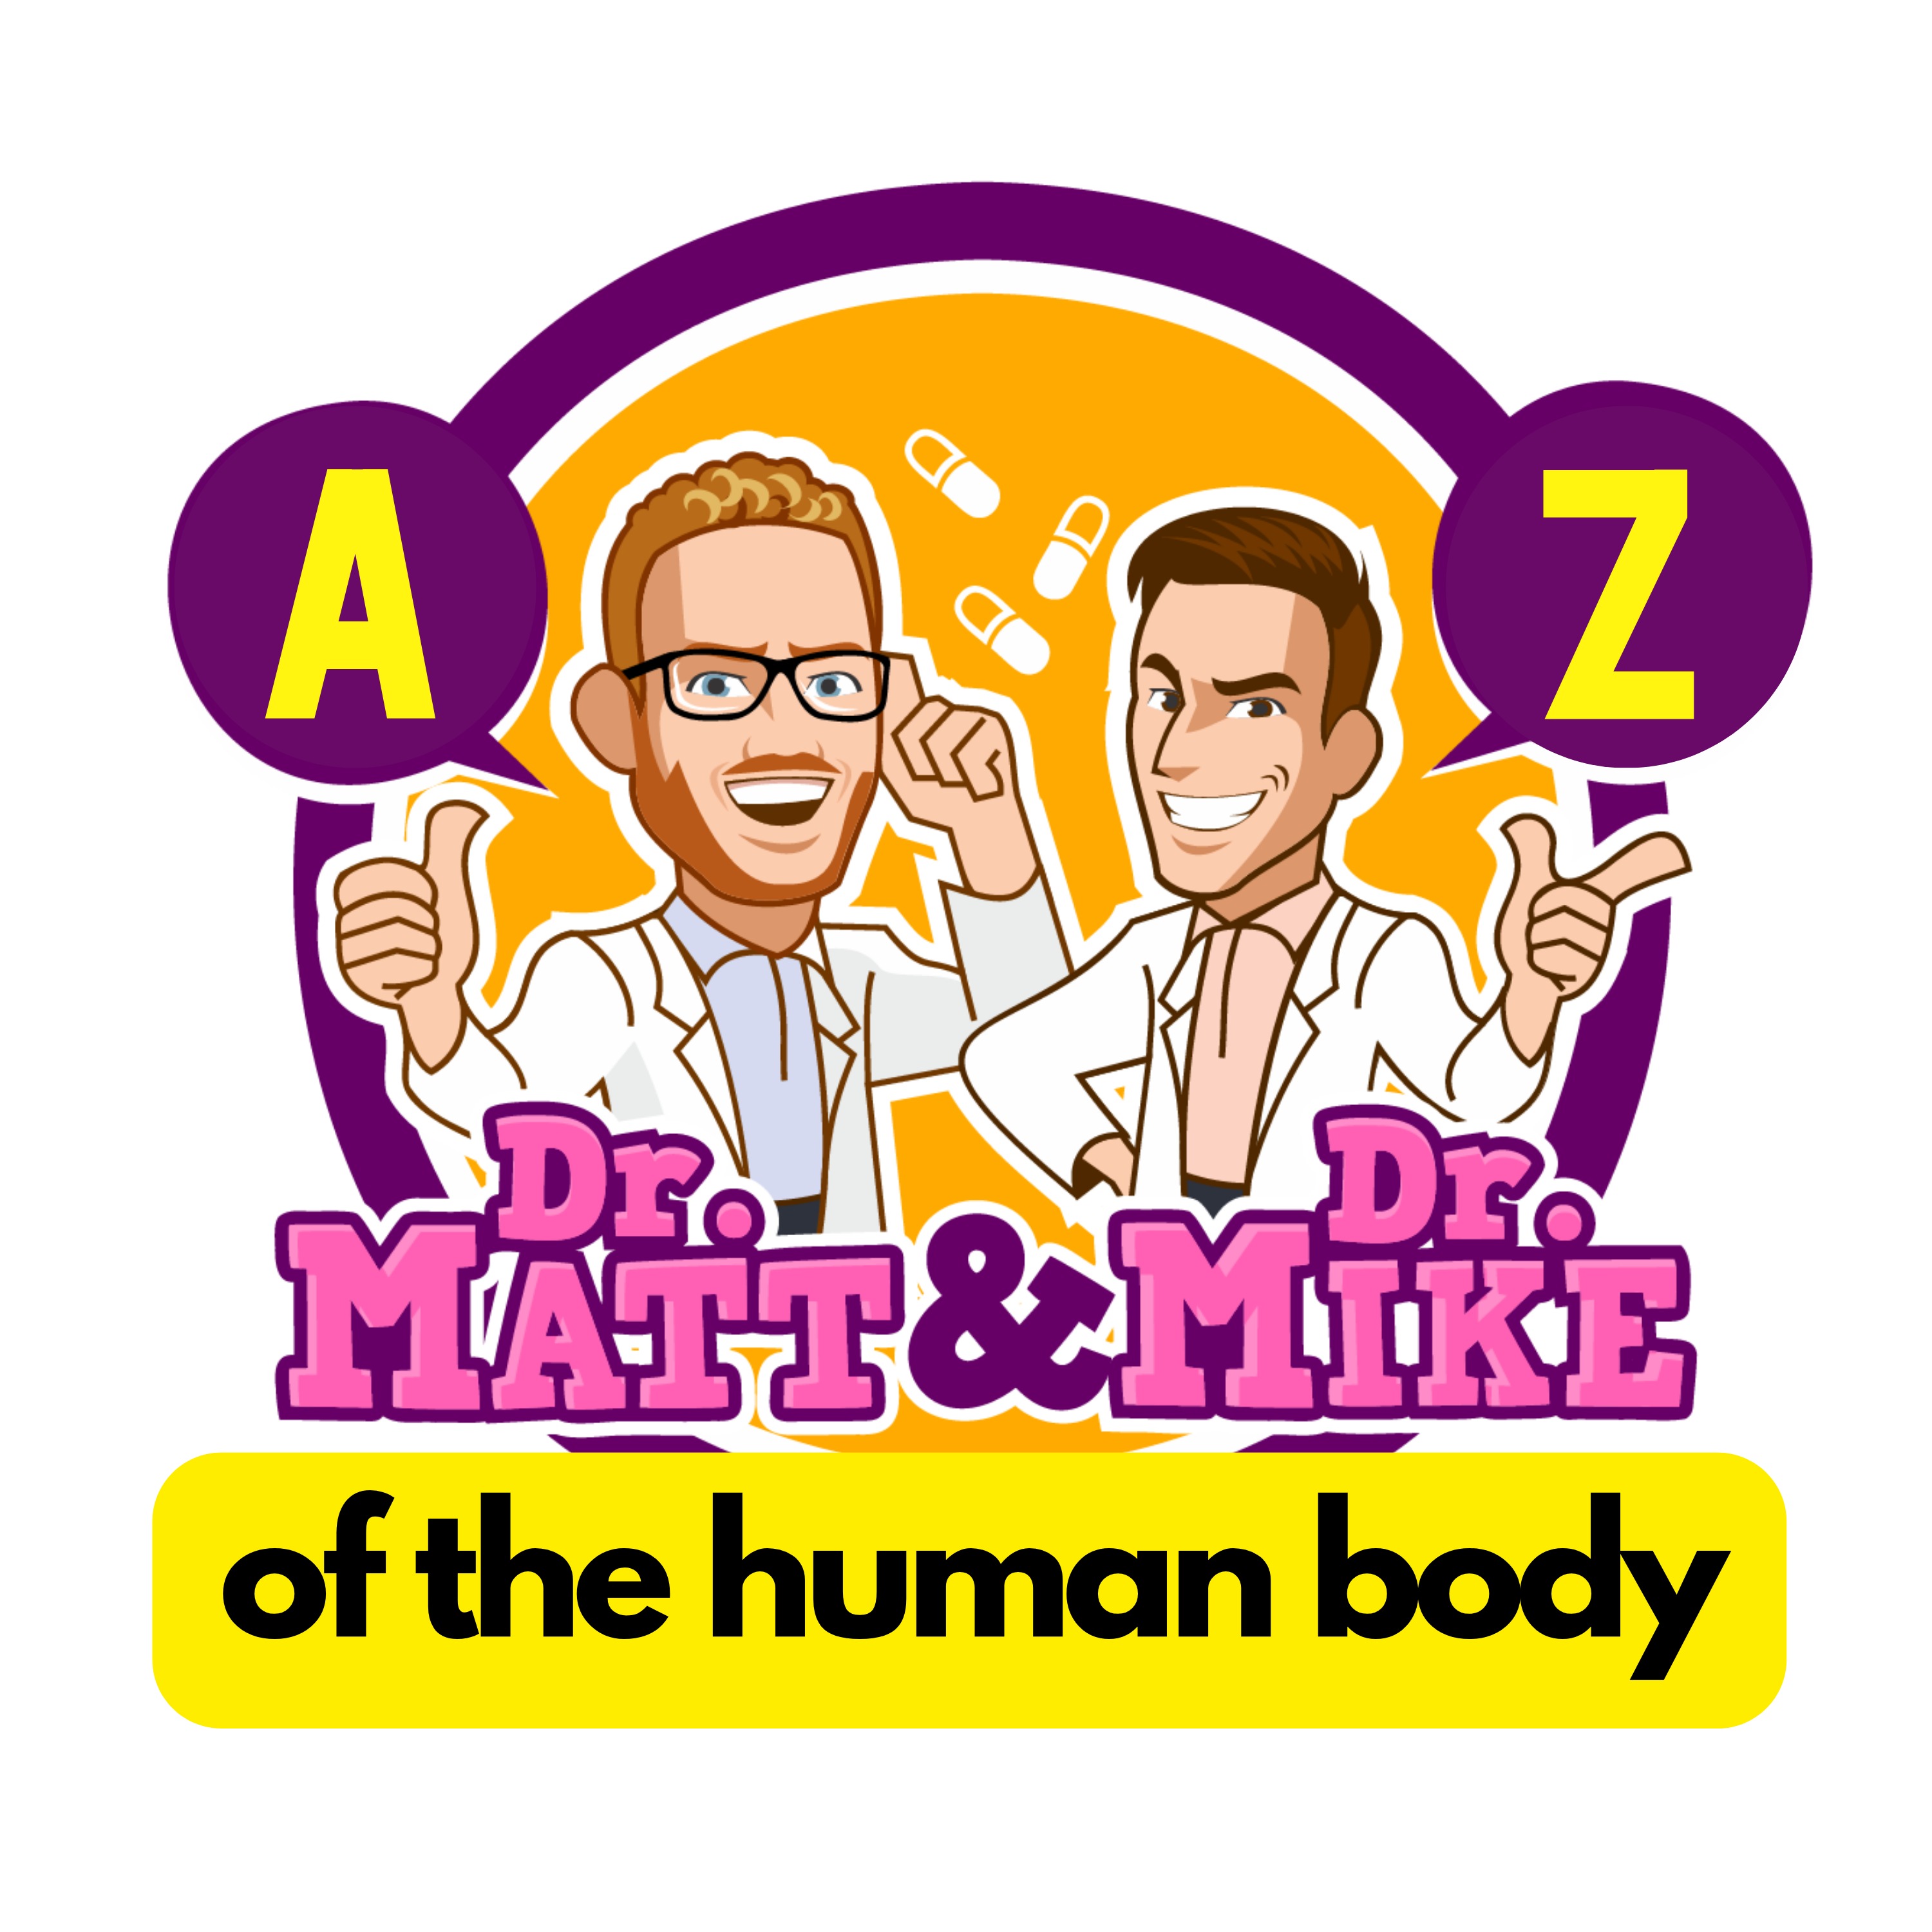 Agranulocytes | A-Z of the Human Body